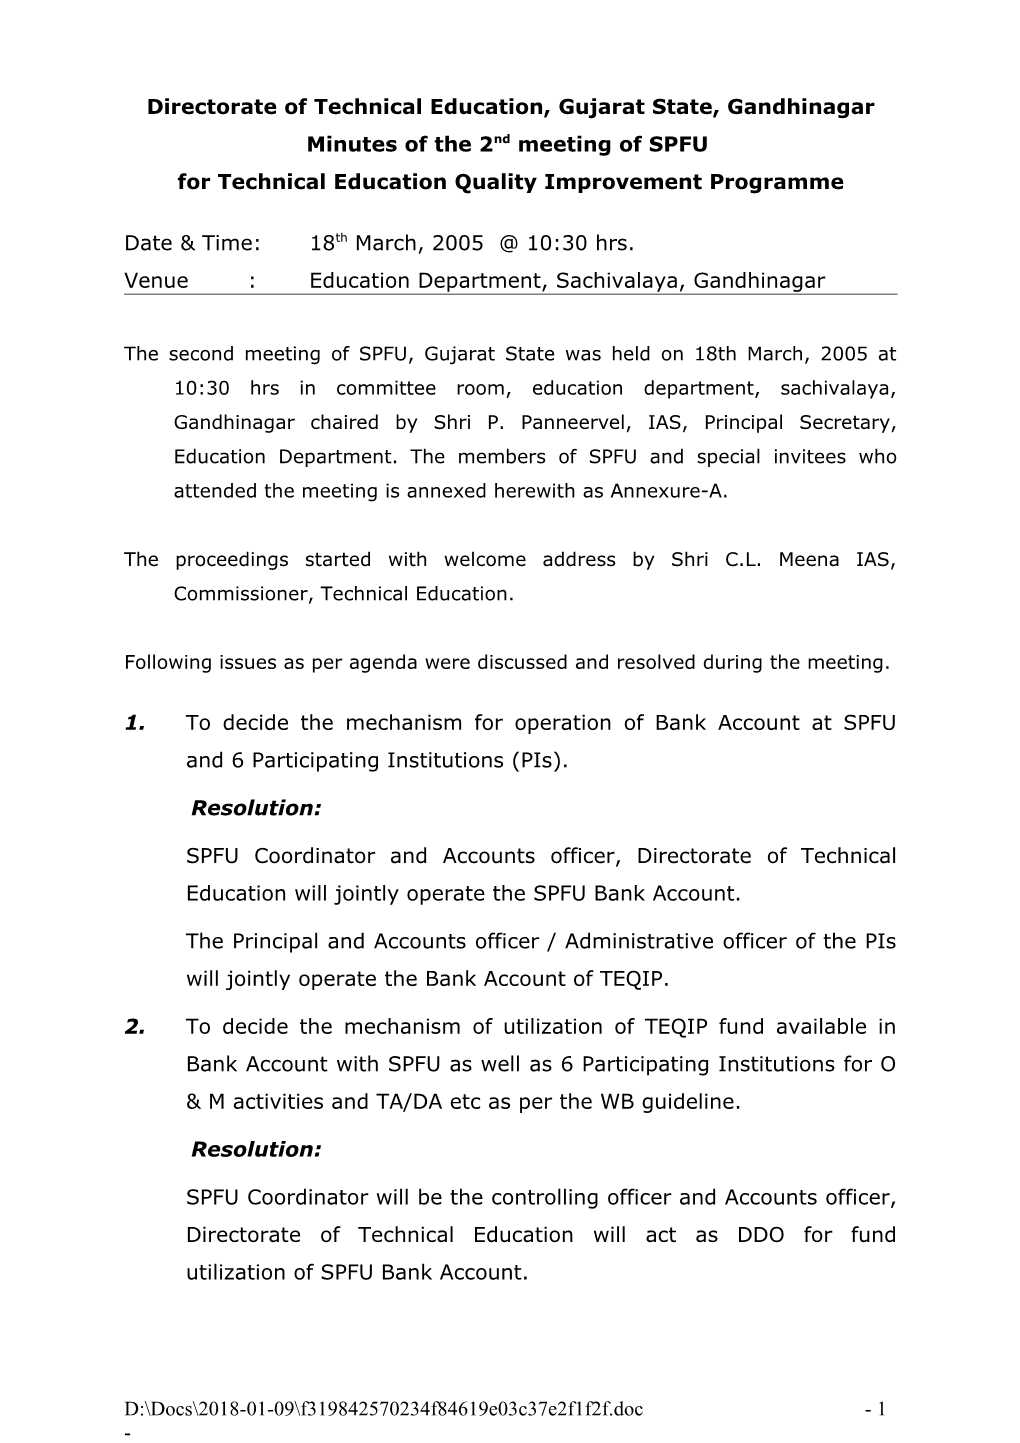 Agenda for the Meeting of SPFU Officers/Officials of DTE Held on 27Th May, 2004 at Directorate